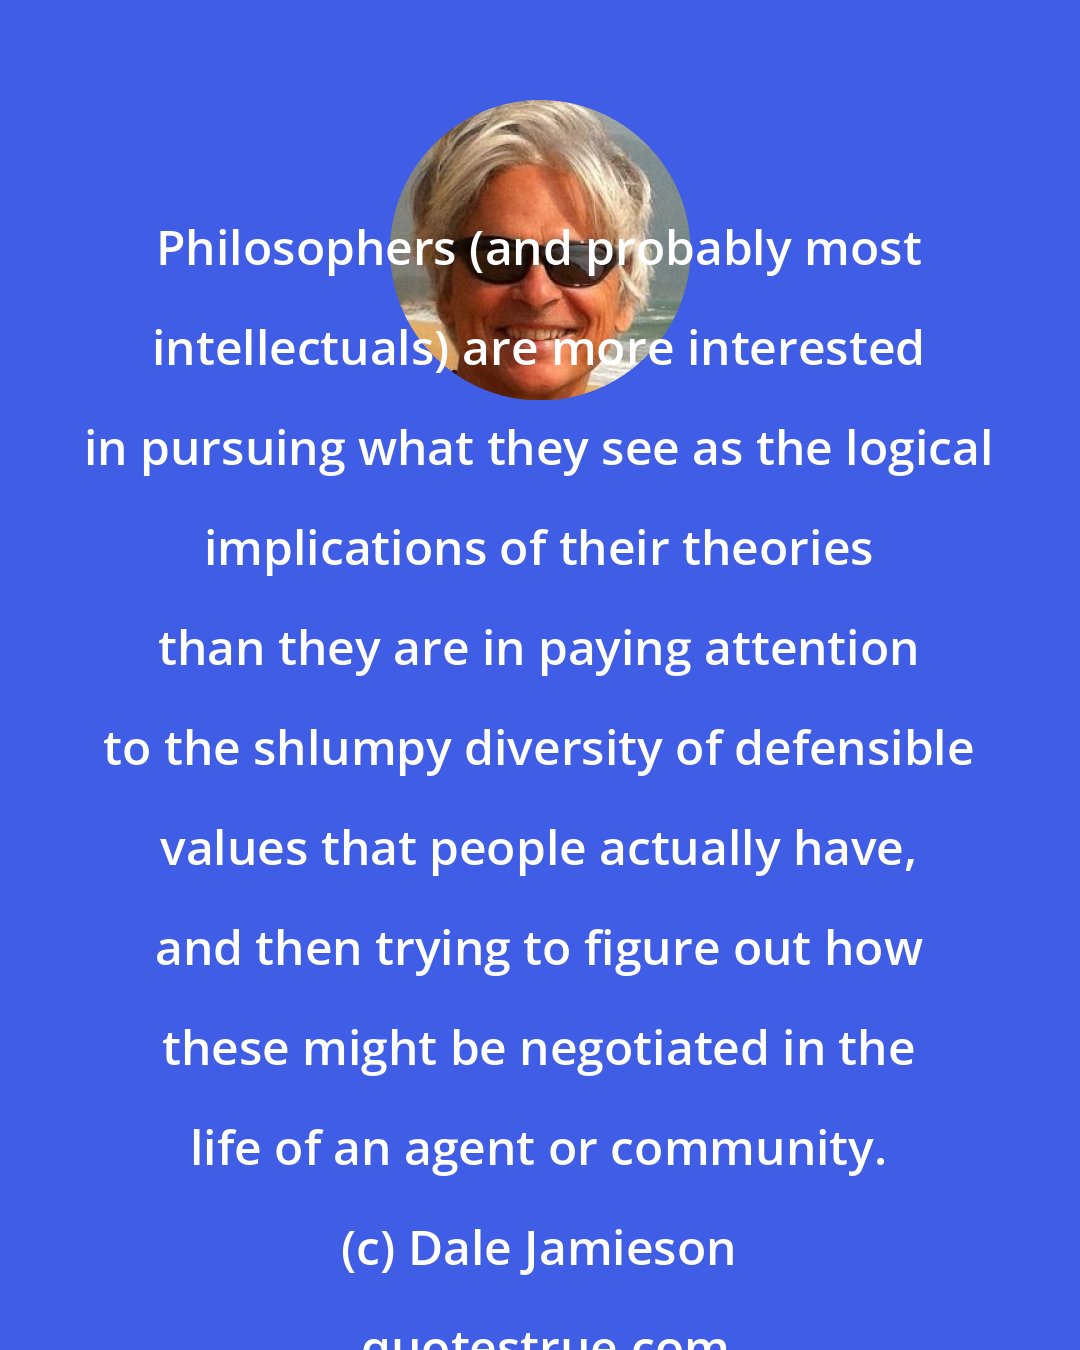 Dale Jamieson: Philosophers (and probably most intellectuals) are more interested in pursuing what they see as the logical implications of their theories than they are in paying attention to the shlumpy diversity of defensible values that people actually have, and then trying to figure out how these might be negotiated in the life of an agent or community.